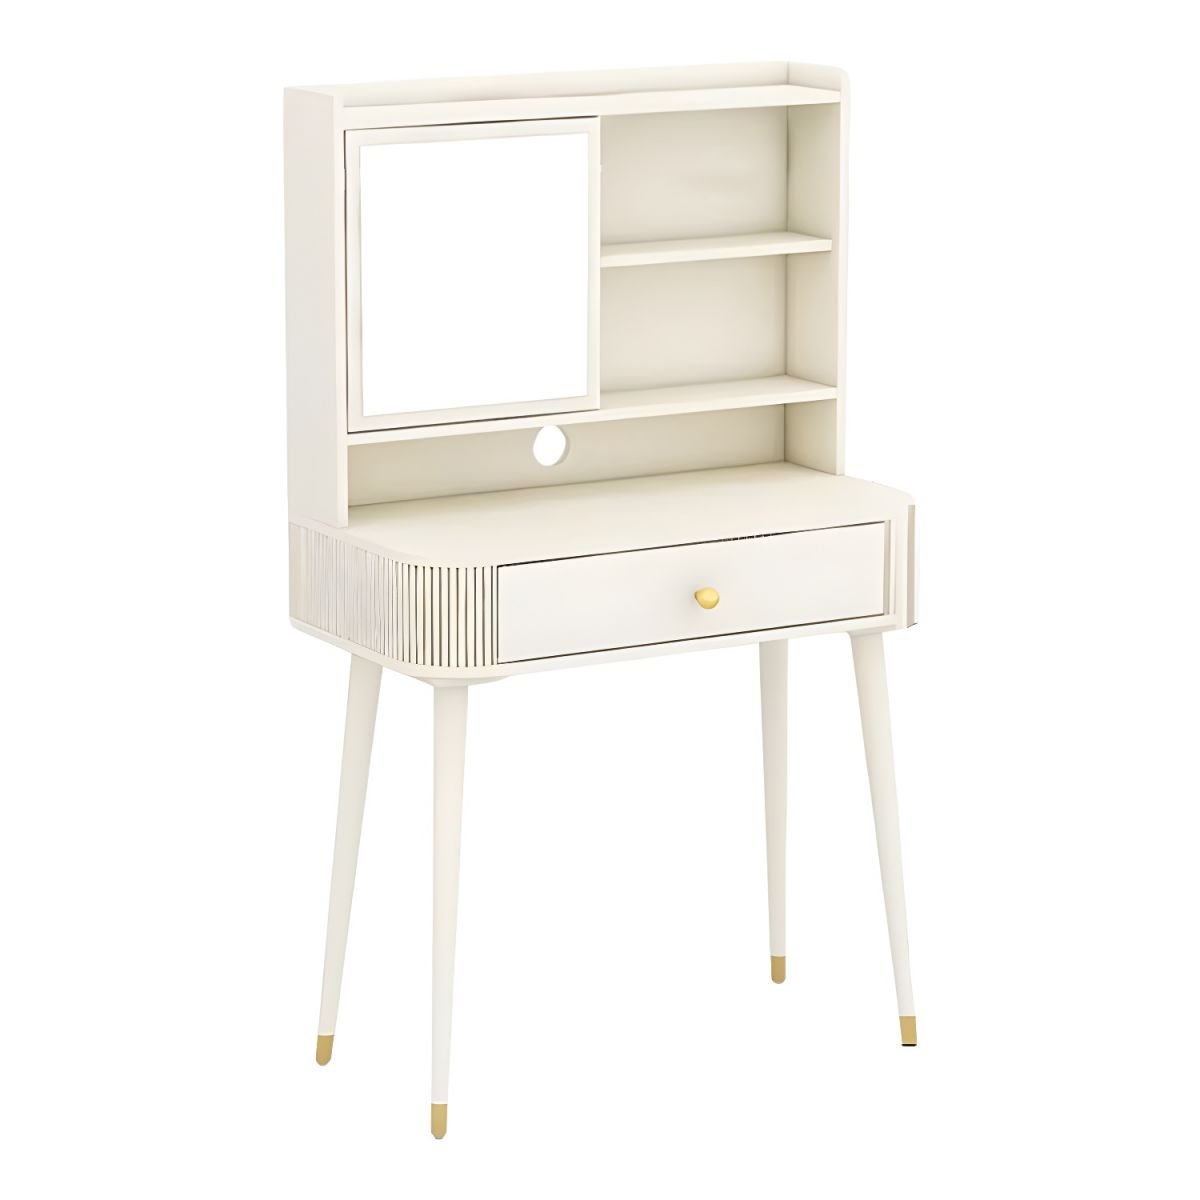 Modern Simple Style Standard Dressing Table Lumber Chalk with Adjustable Mirror, Makeup Vanity & Mirror, 31"L x 16"W x 53"H